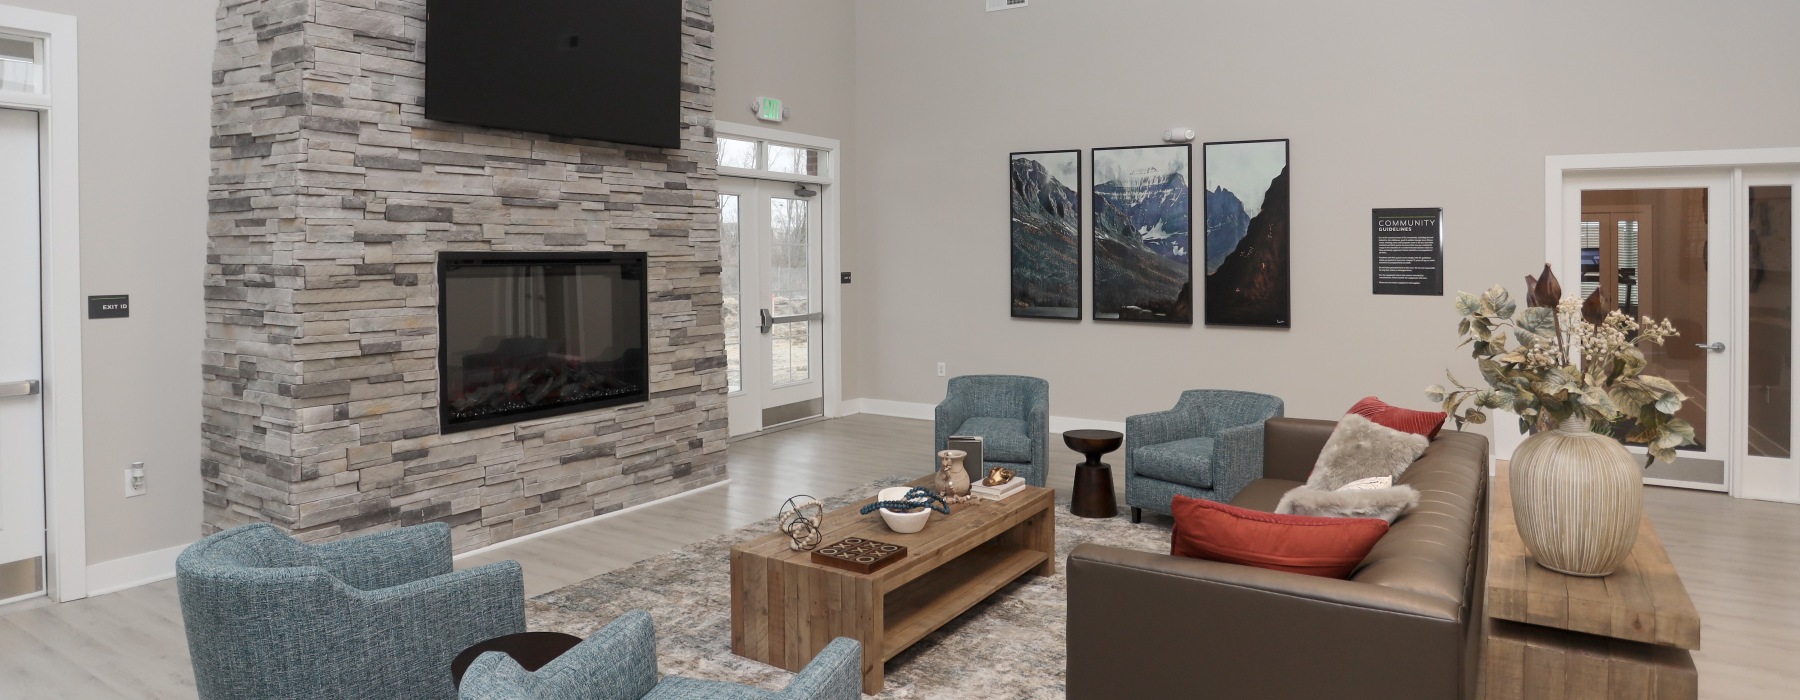 seating area with fireplace and TV